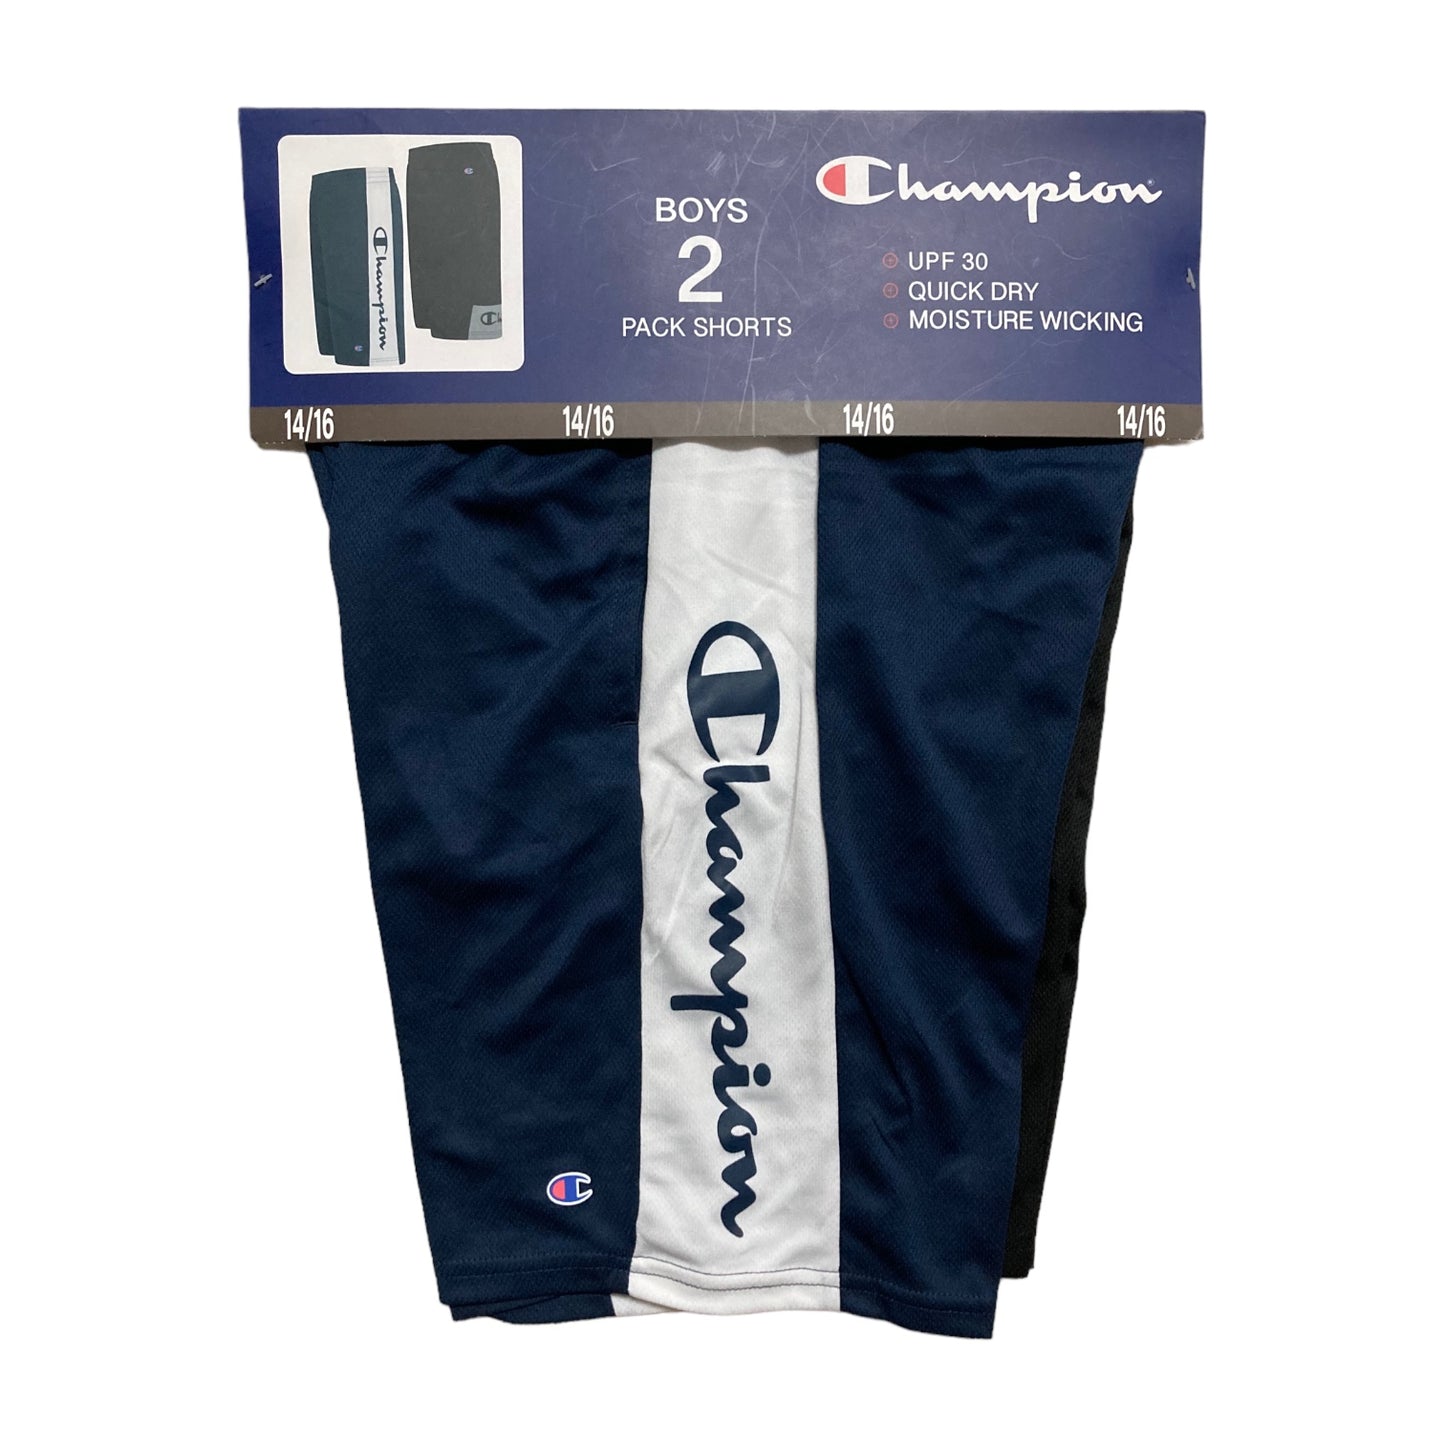 Champion Boy's Moisture Wicking UPF 30 Quick Dry Active Shorts, 2 Pack